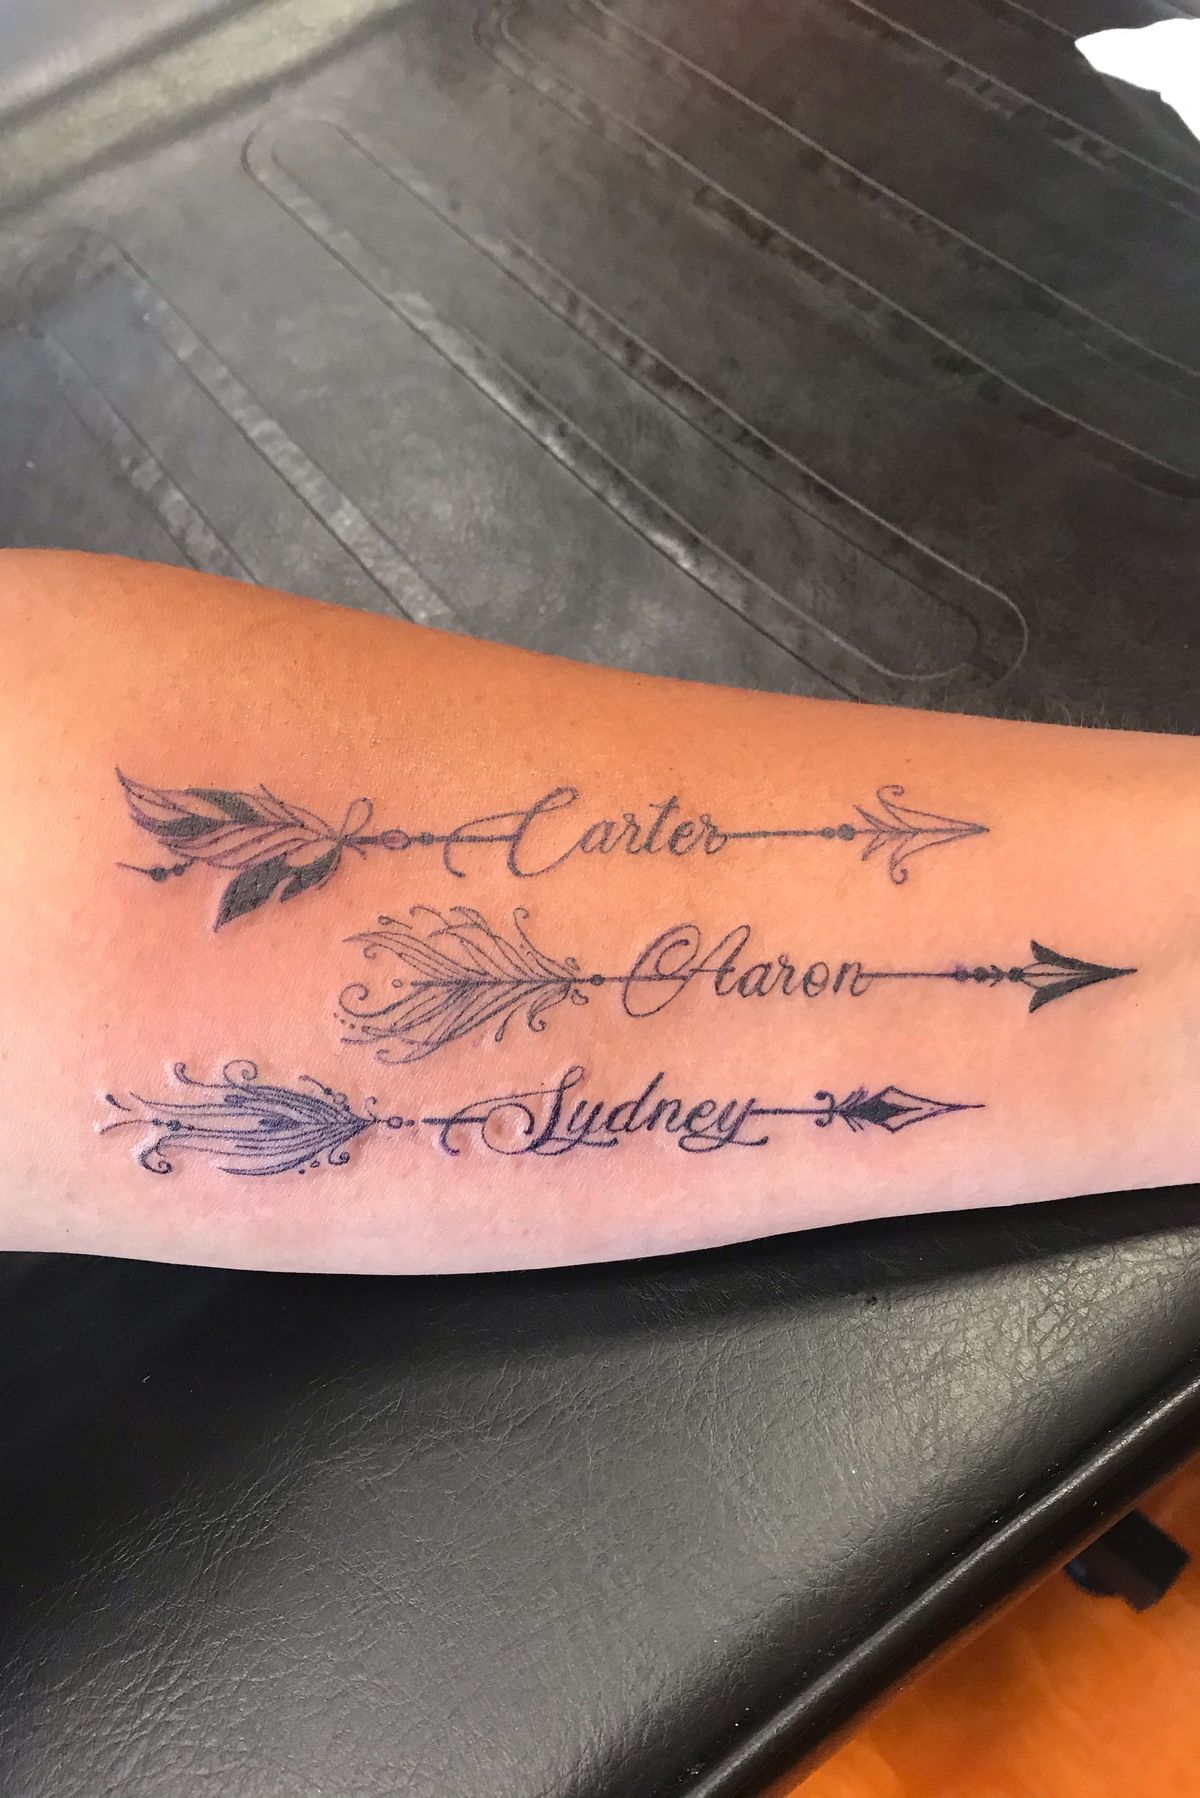 Tattoo uploaded by Daphne Cote • Arrows with kids names for this momma ...